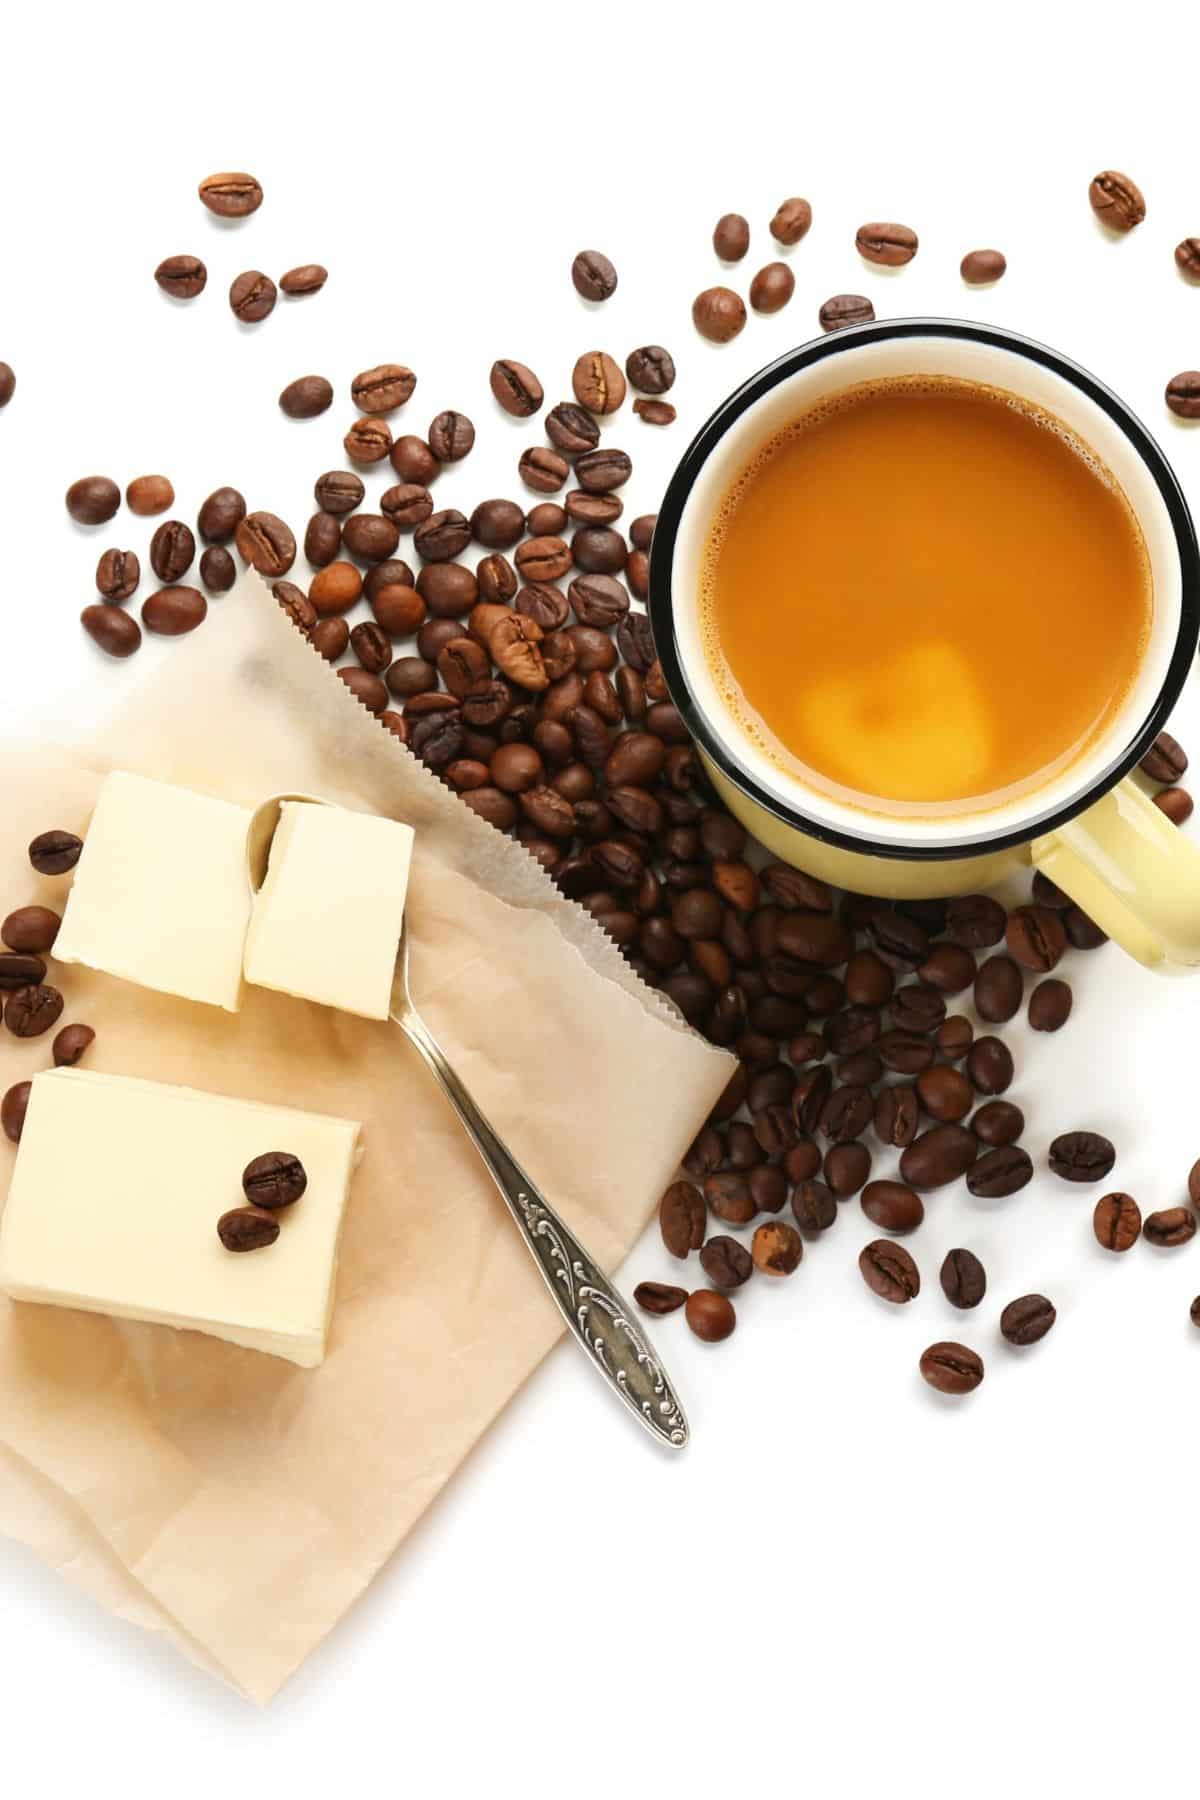 Does Butter Coffee (Bulletproof Coffee) Have Health Benefits?